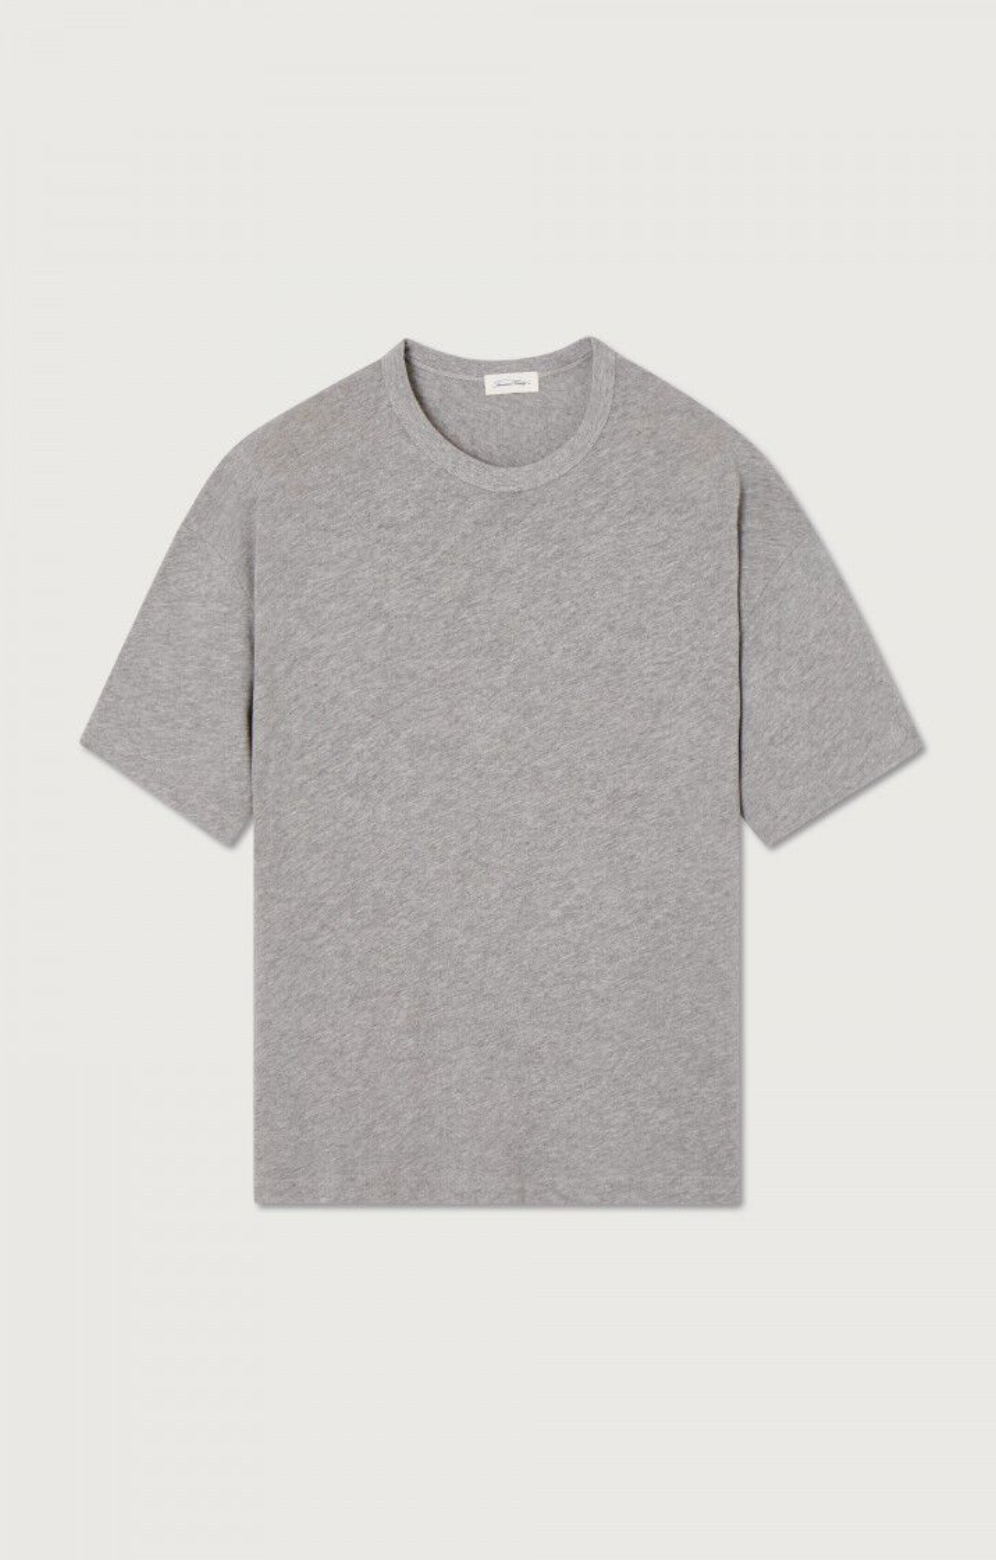 A front flat lay image of the Sonoma T-Shirt in grey